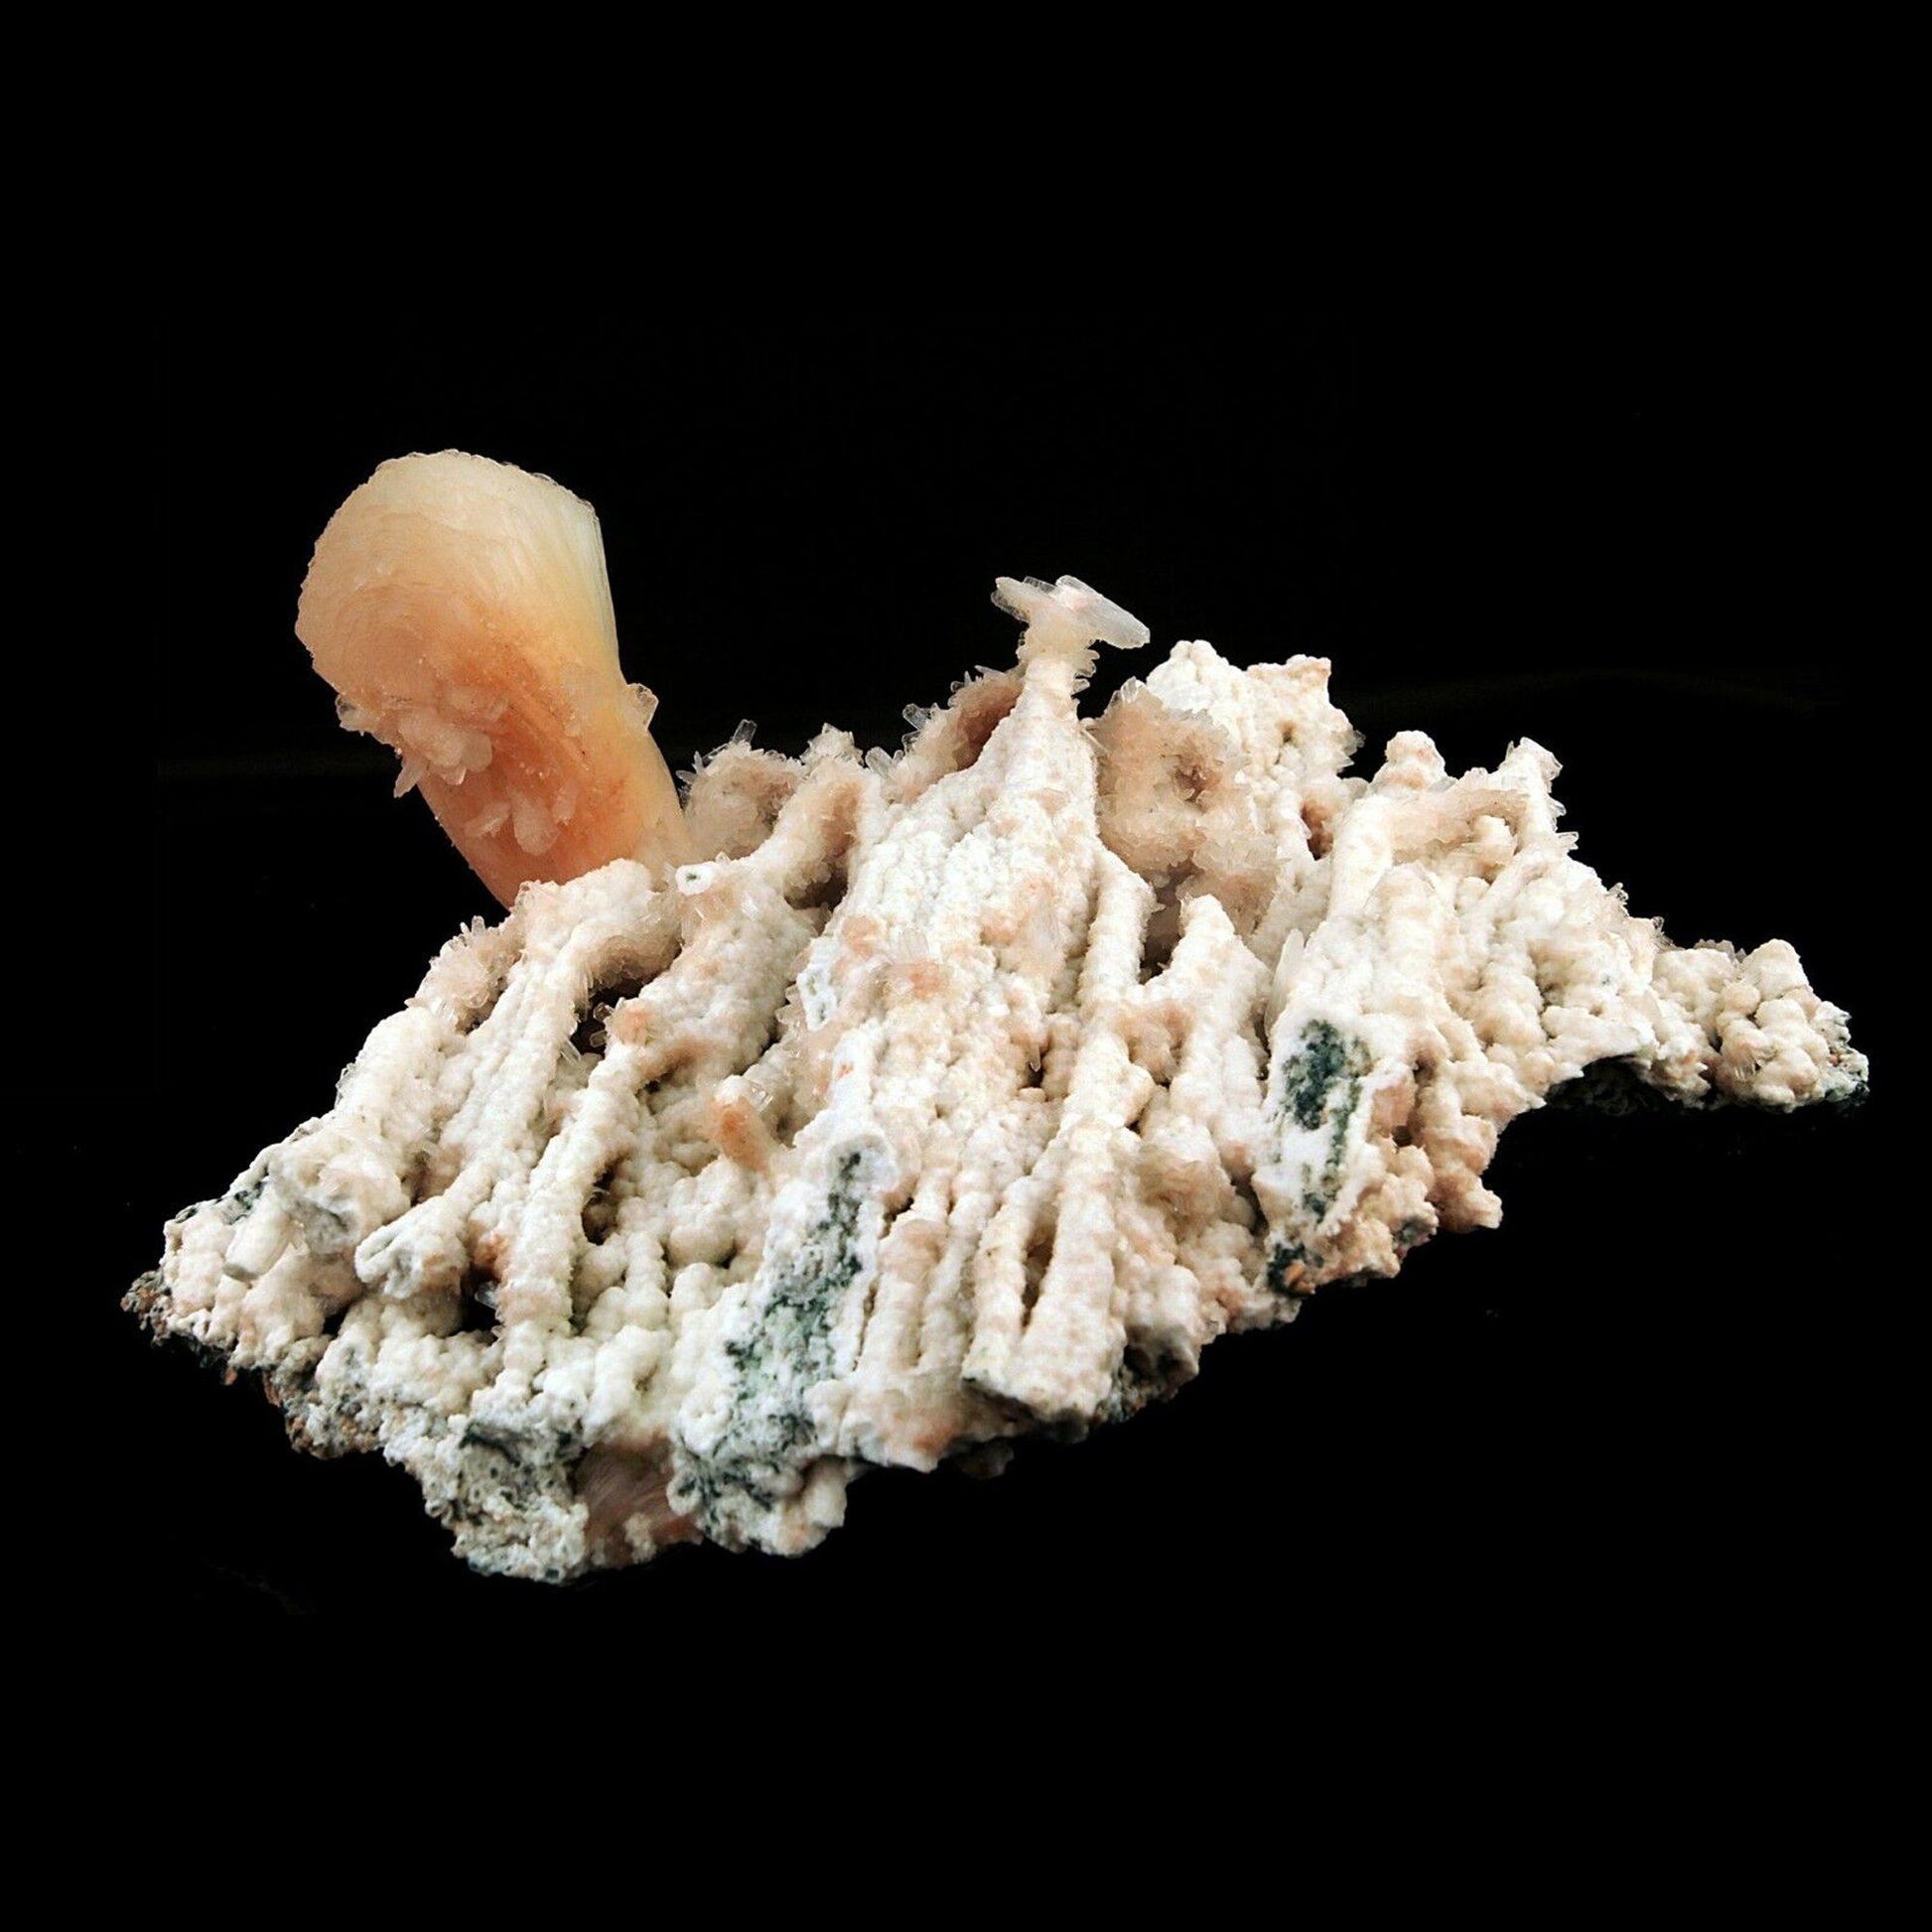 Pink Stilbite Crystal on Chalcedony Natural Coral Formation # B 2603 his is an intergrown group of lustrous, translucent, terra-cotta colored Stilbite on Chalcedony natural coral formation. Primary Mineral(s): Stilbite Secondary Mineral(s): N/AMatrix: Chalcedony19 cm x 14 cm750 GmsLocality: Aurangabad, Maharashtra, IndiaYear of Discovery: 2018